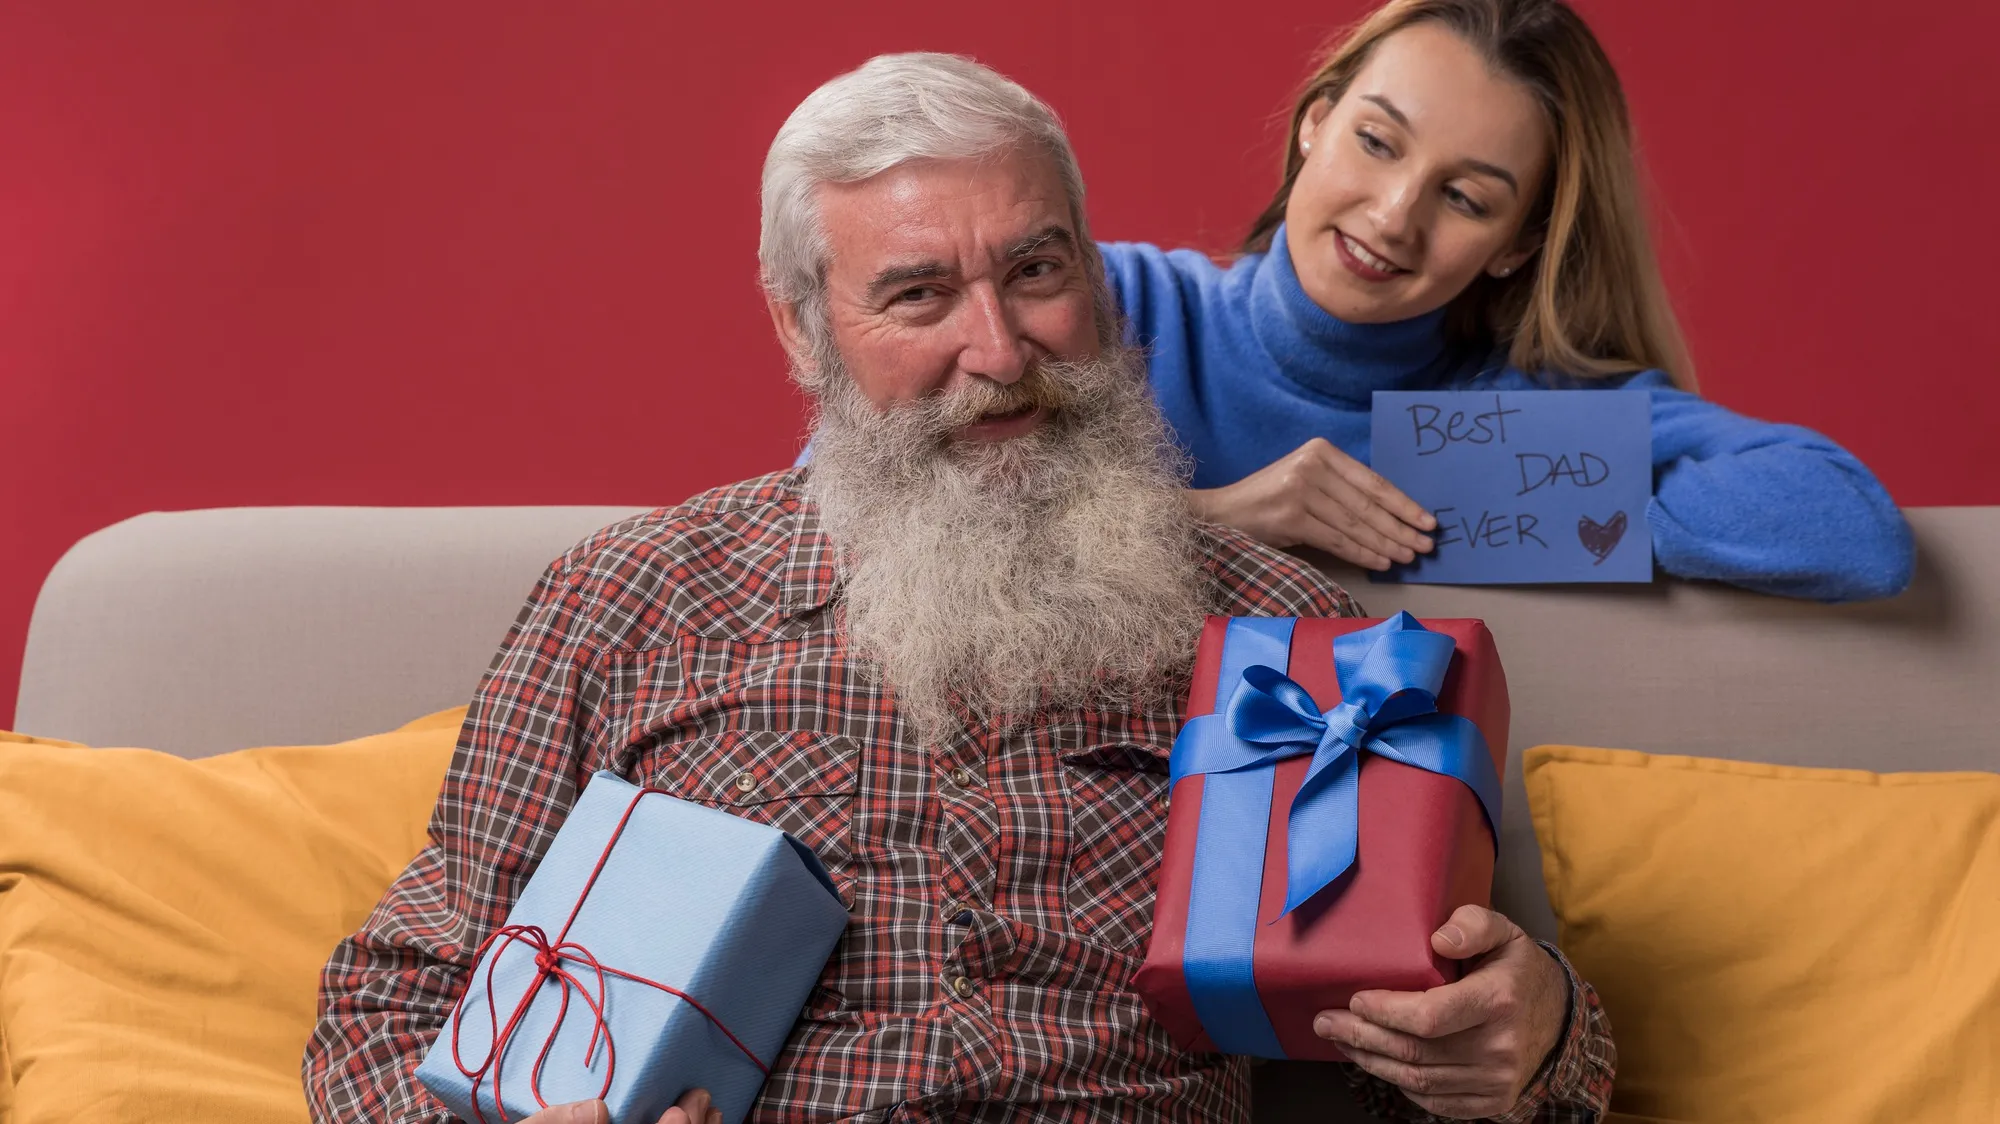 70 Gift Ideas for Elderly Fathers That Your Dad Will Truly Appreciate